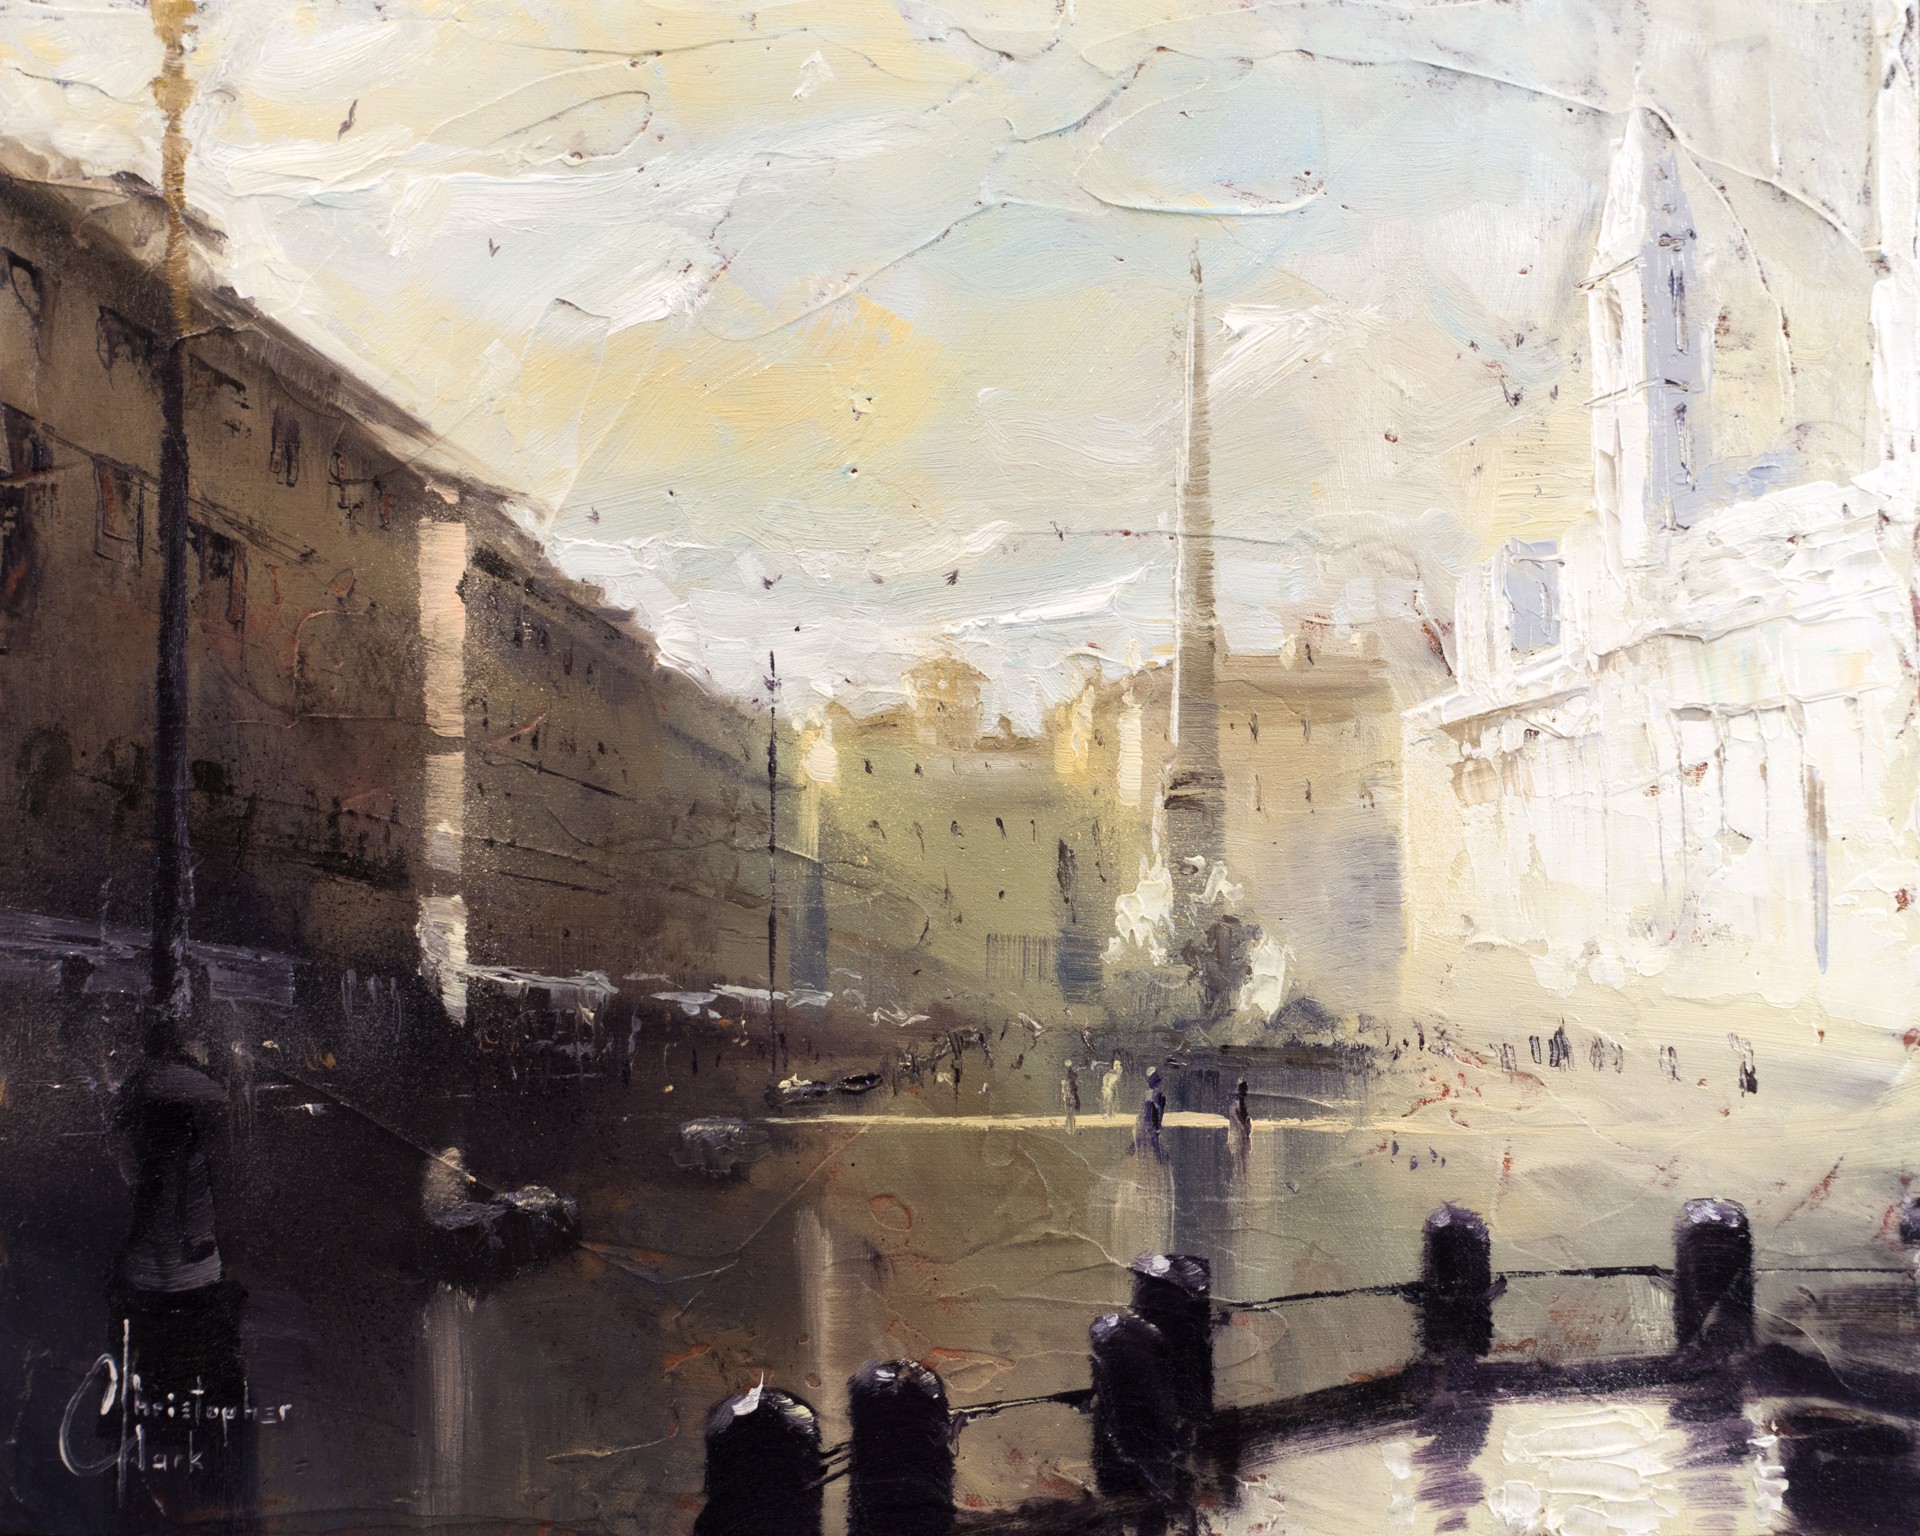 Rome, Piazza Navona at Dawn by Christopher Clark